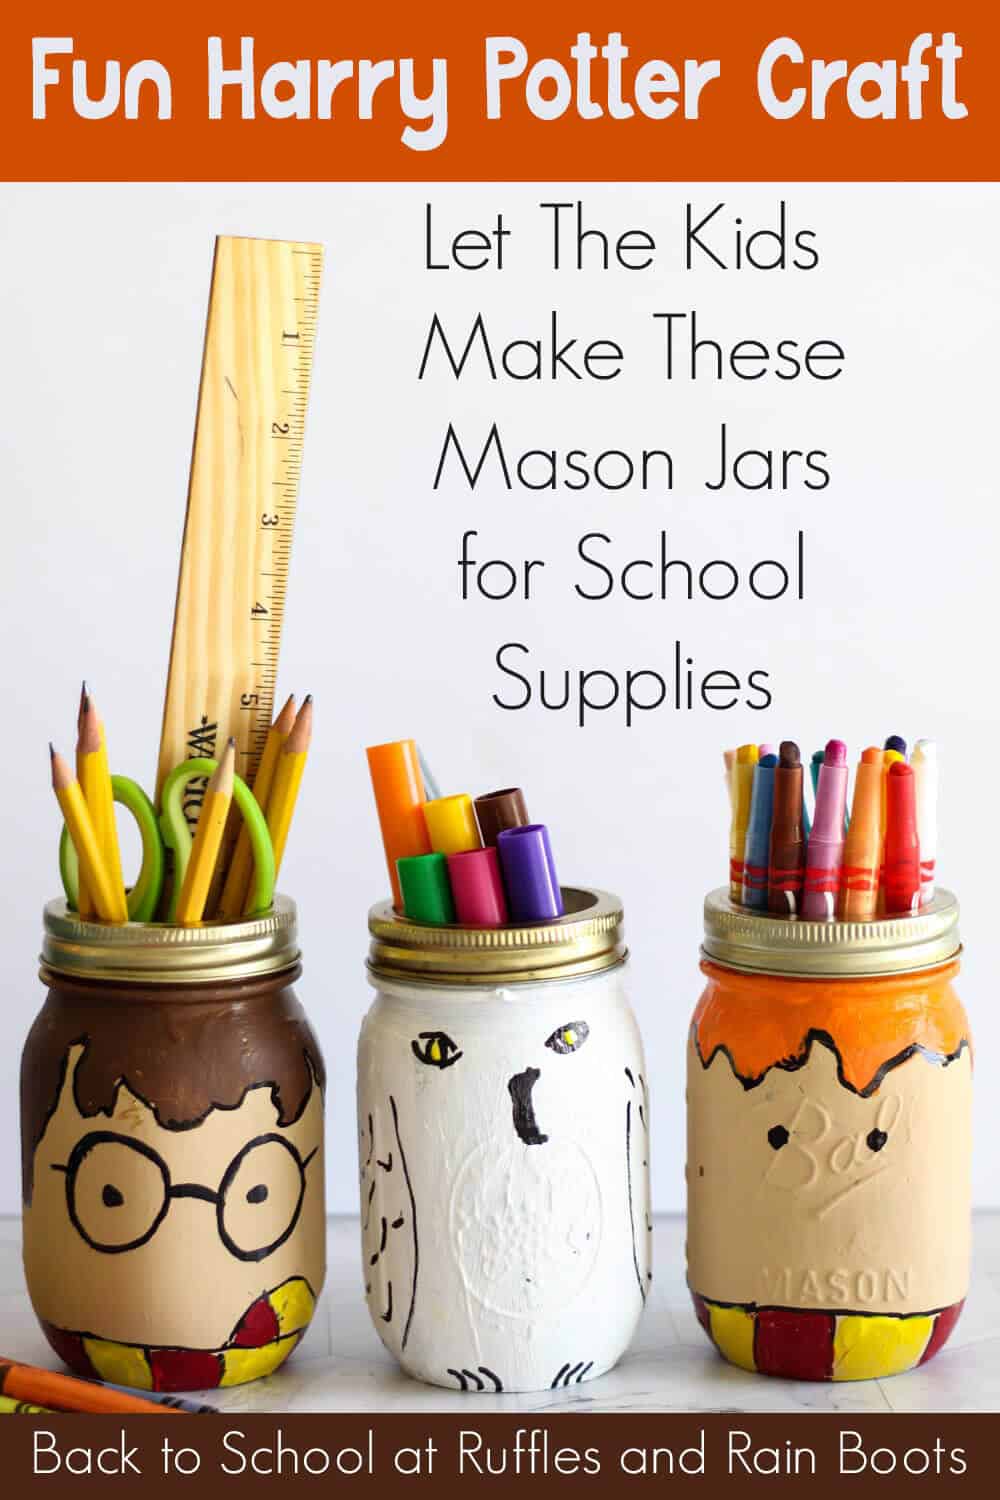 harry potter mason jar crafts idea for kids with text which reads fun harry potter craft let the kids make these mason jars for school supplies